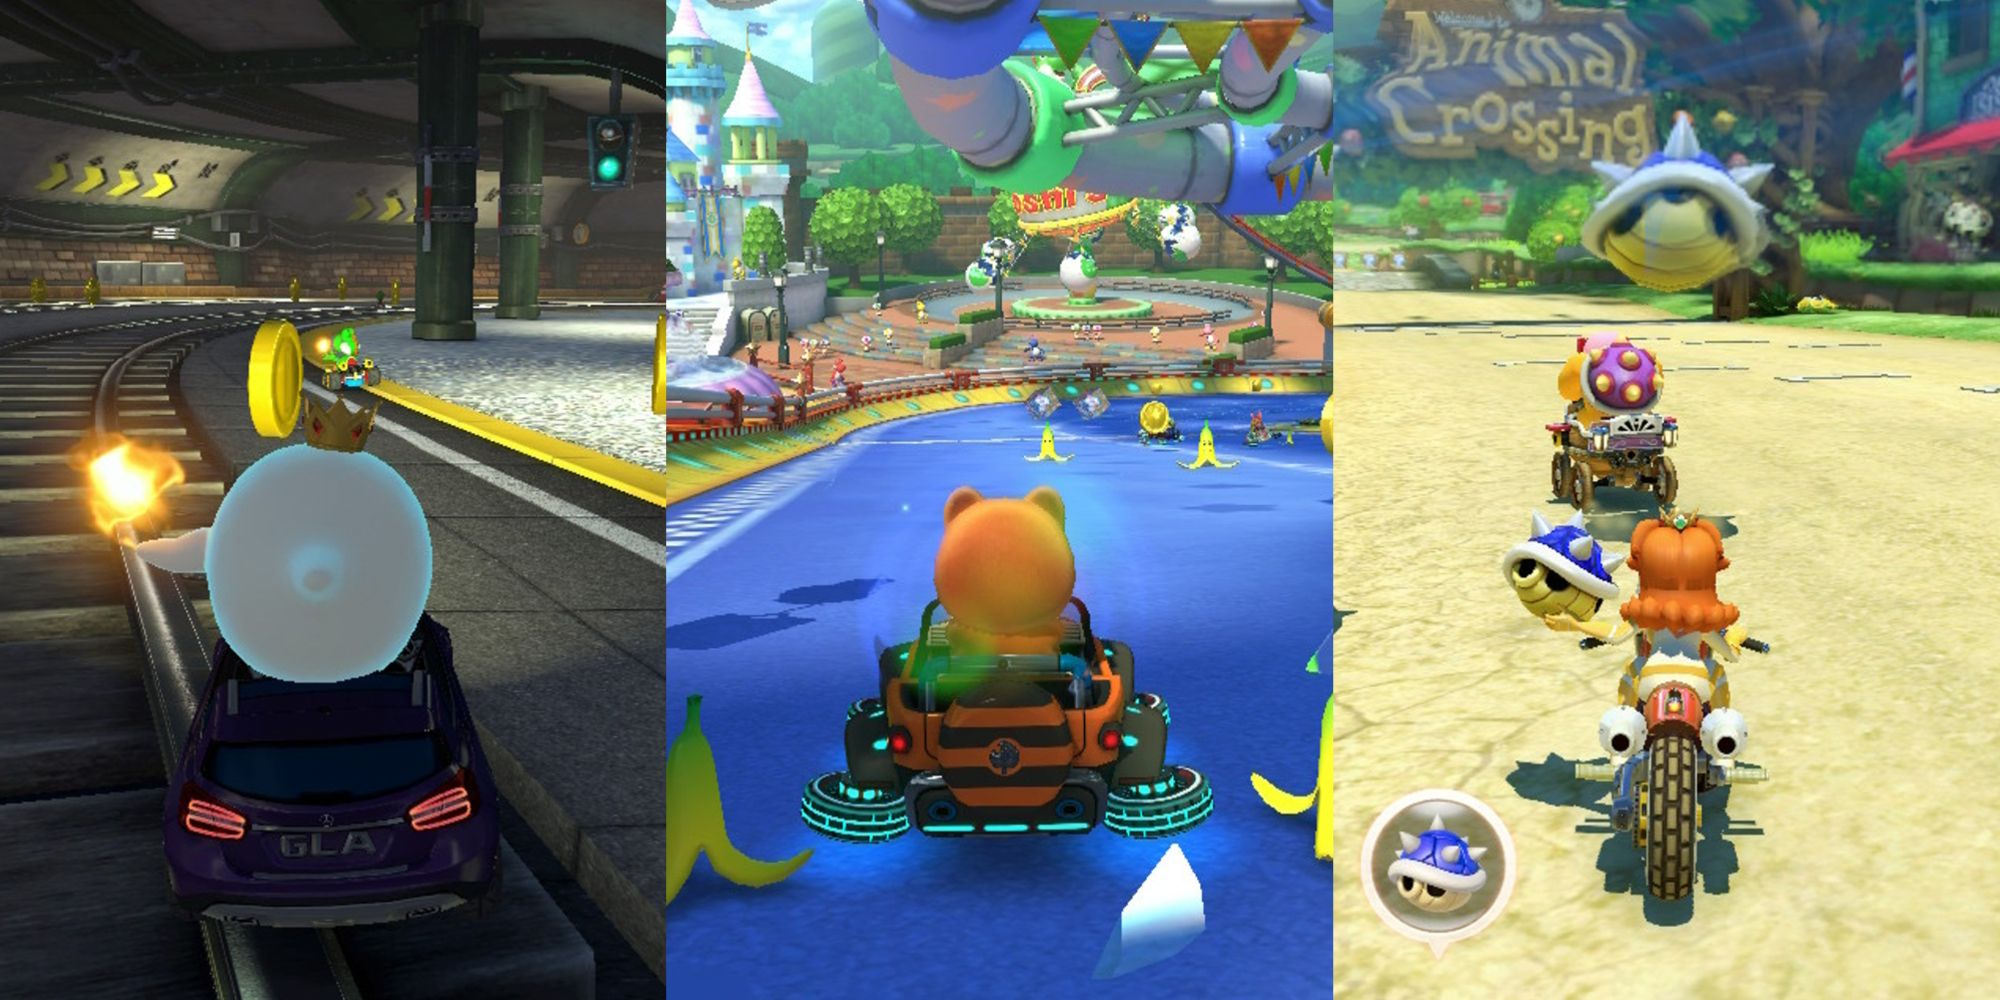 Best Mario Kart 8 Deluxe Items  Every Item Ranked on Make a GIF